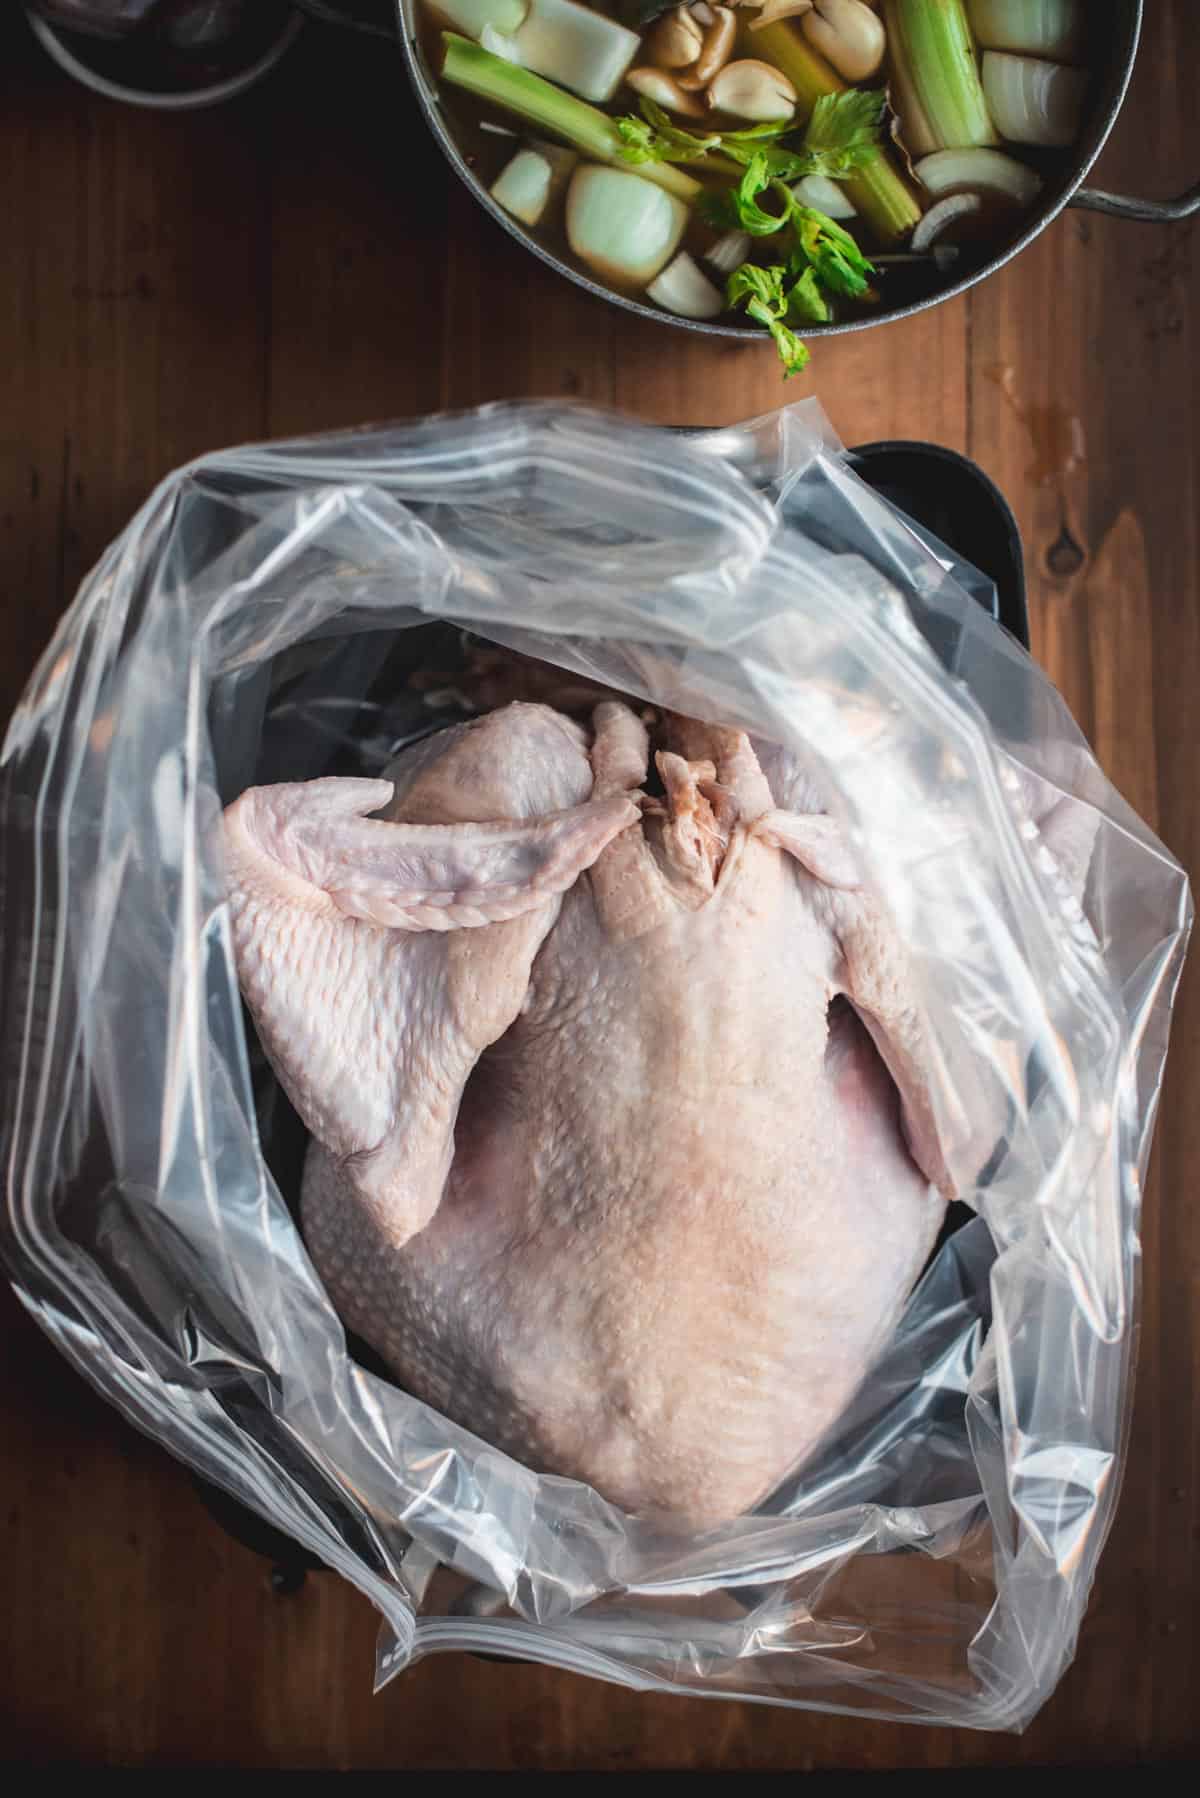 Full raw turkey sitting in a clear brining bag in a baking pan. The bag is open but there is nothing other than the turkey inside it.
Above the turkey there is a pot with liquid, herbs and onions and garlic inside it.